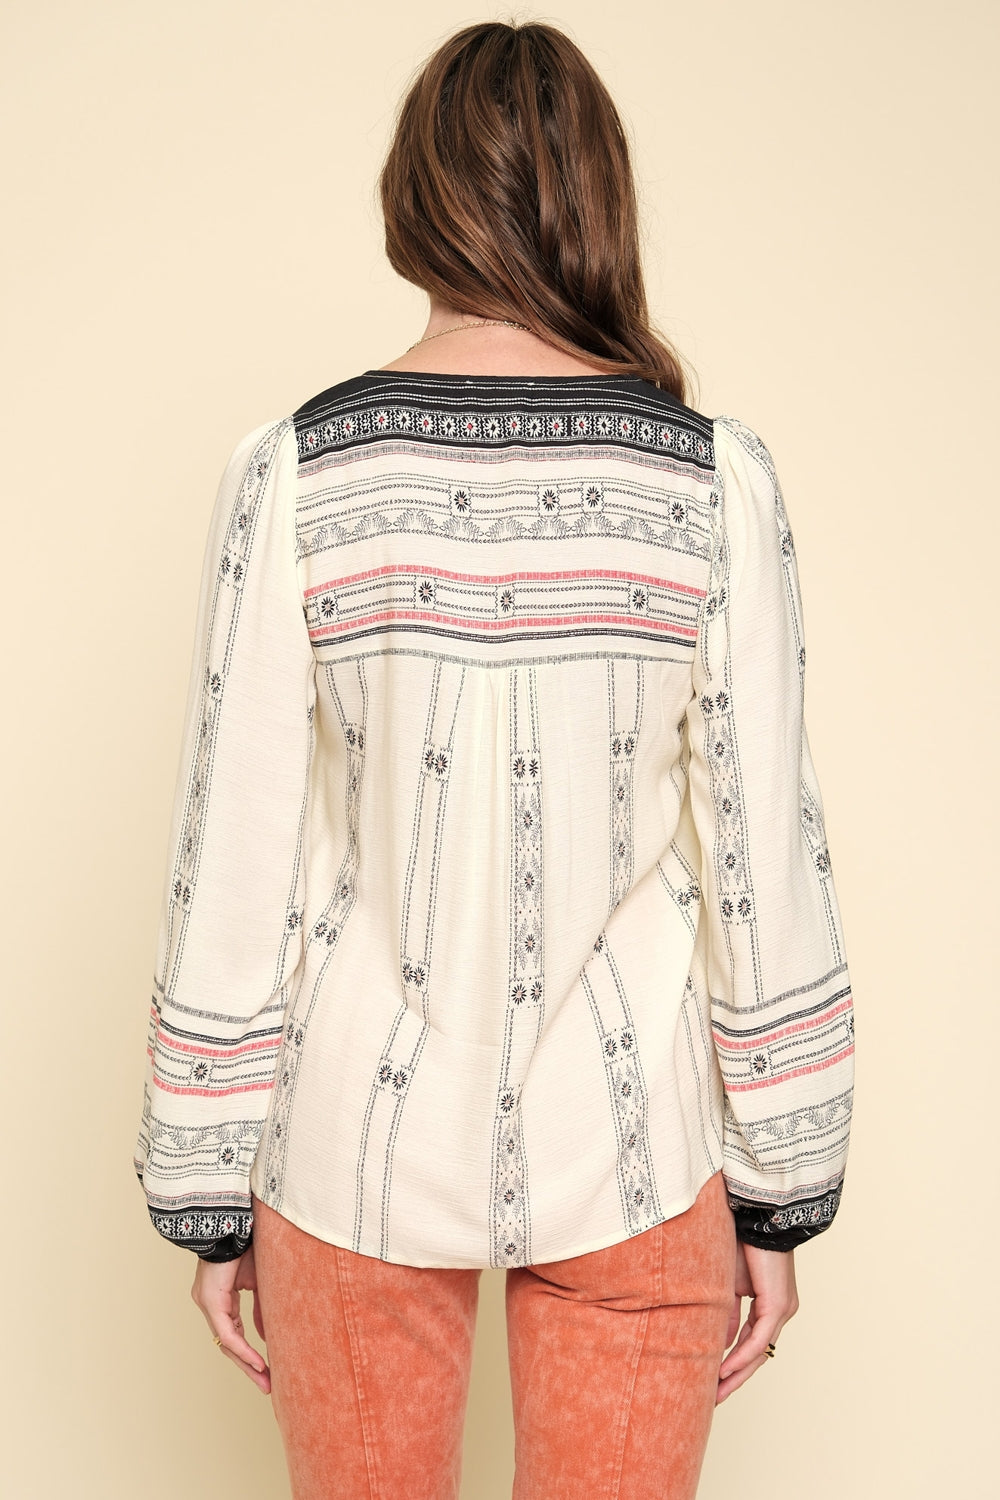 Boho Border Print Top: Trendy top with balloon sleeves, tassel tie V-neck, and contrasting shoulder and cuff details. Versatile and stylish with intricate border print. Perfect for pairing with jeans or skirts for effortless boho-chic fashion.